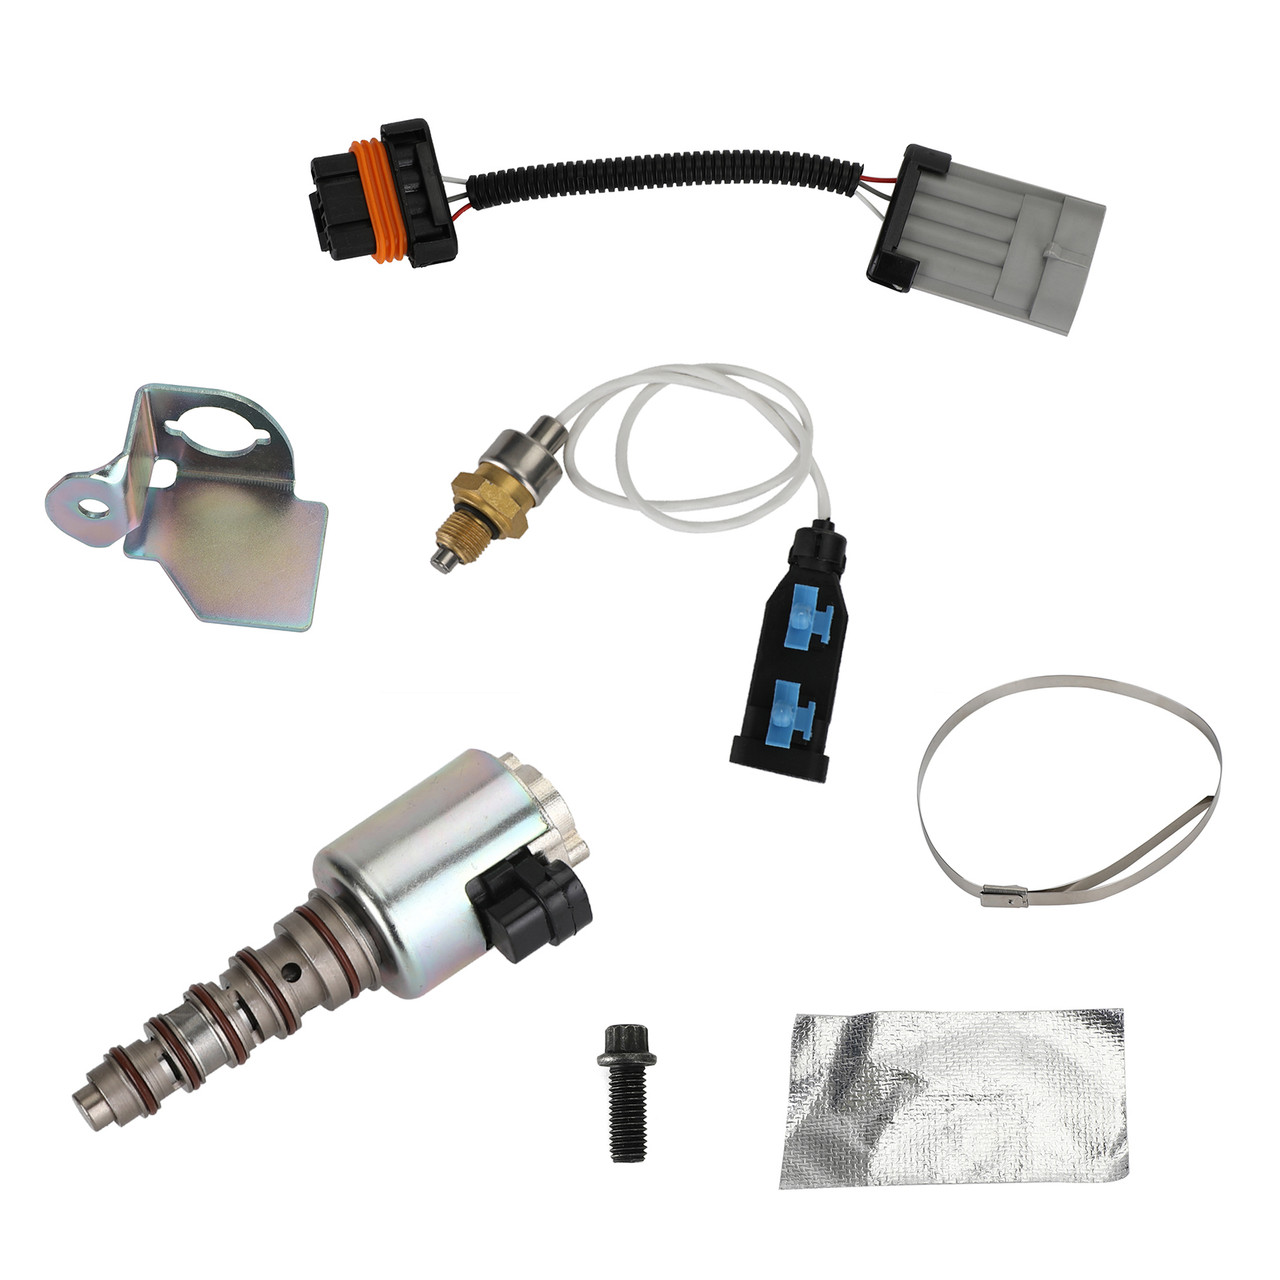 2005-2010 Ford E-Series Turbo VGT Tune-Up Kit-Vane Position Sensor 12635324 & VGT Solenoid 3C3Z6F089AA 6.0L Powerstroke engine